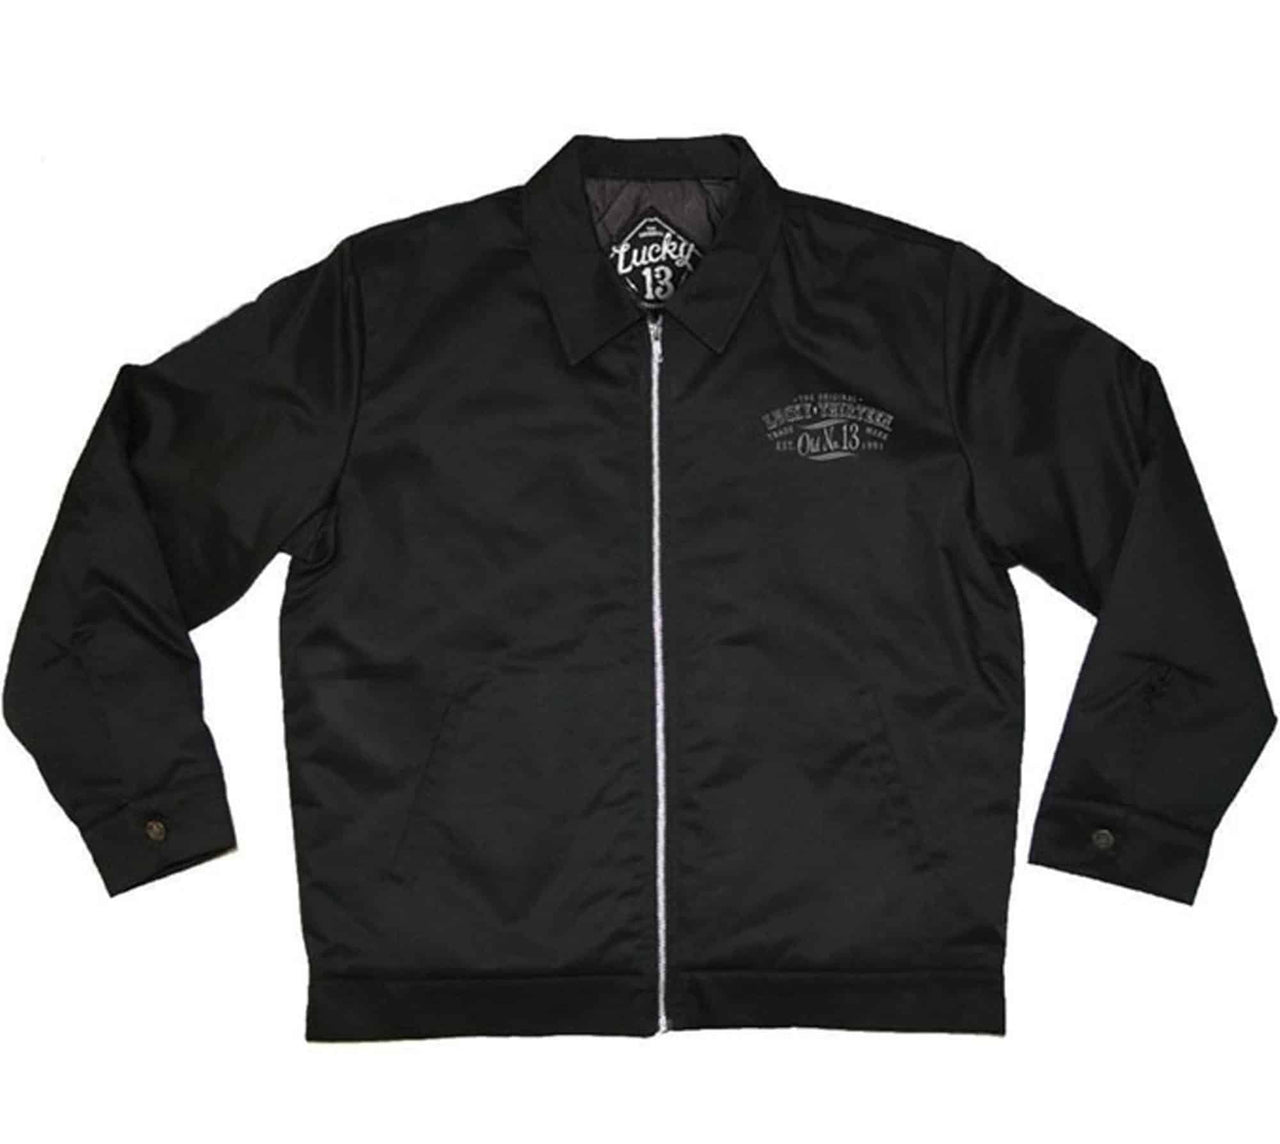 Lucky 13 Jacket Low and Evil